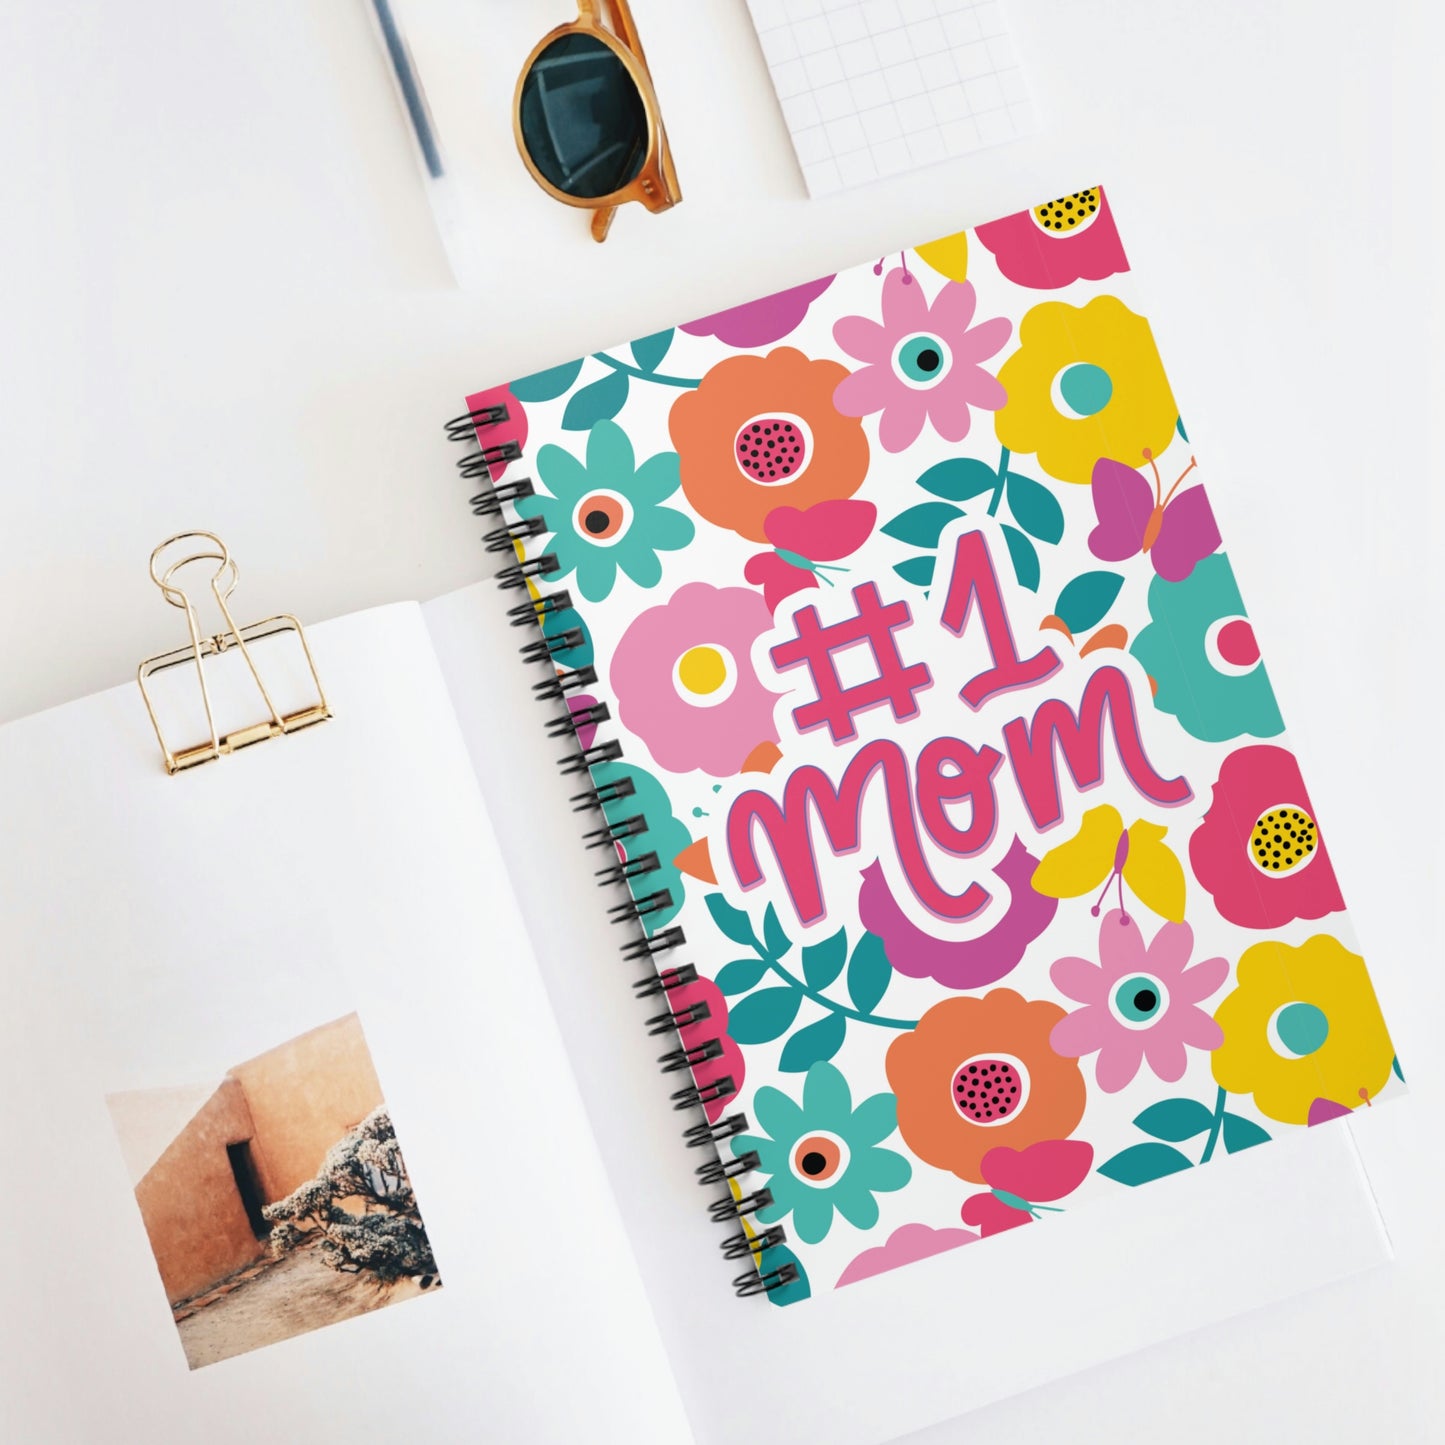 #1 Mom Spiral Notebook - Ruled Line, Mothers Day Gift